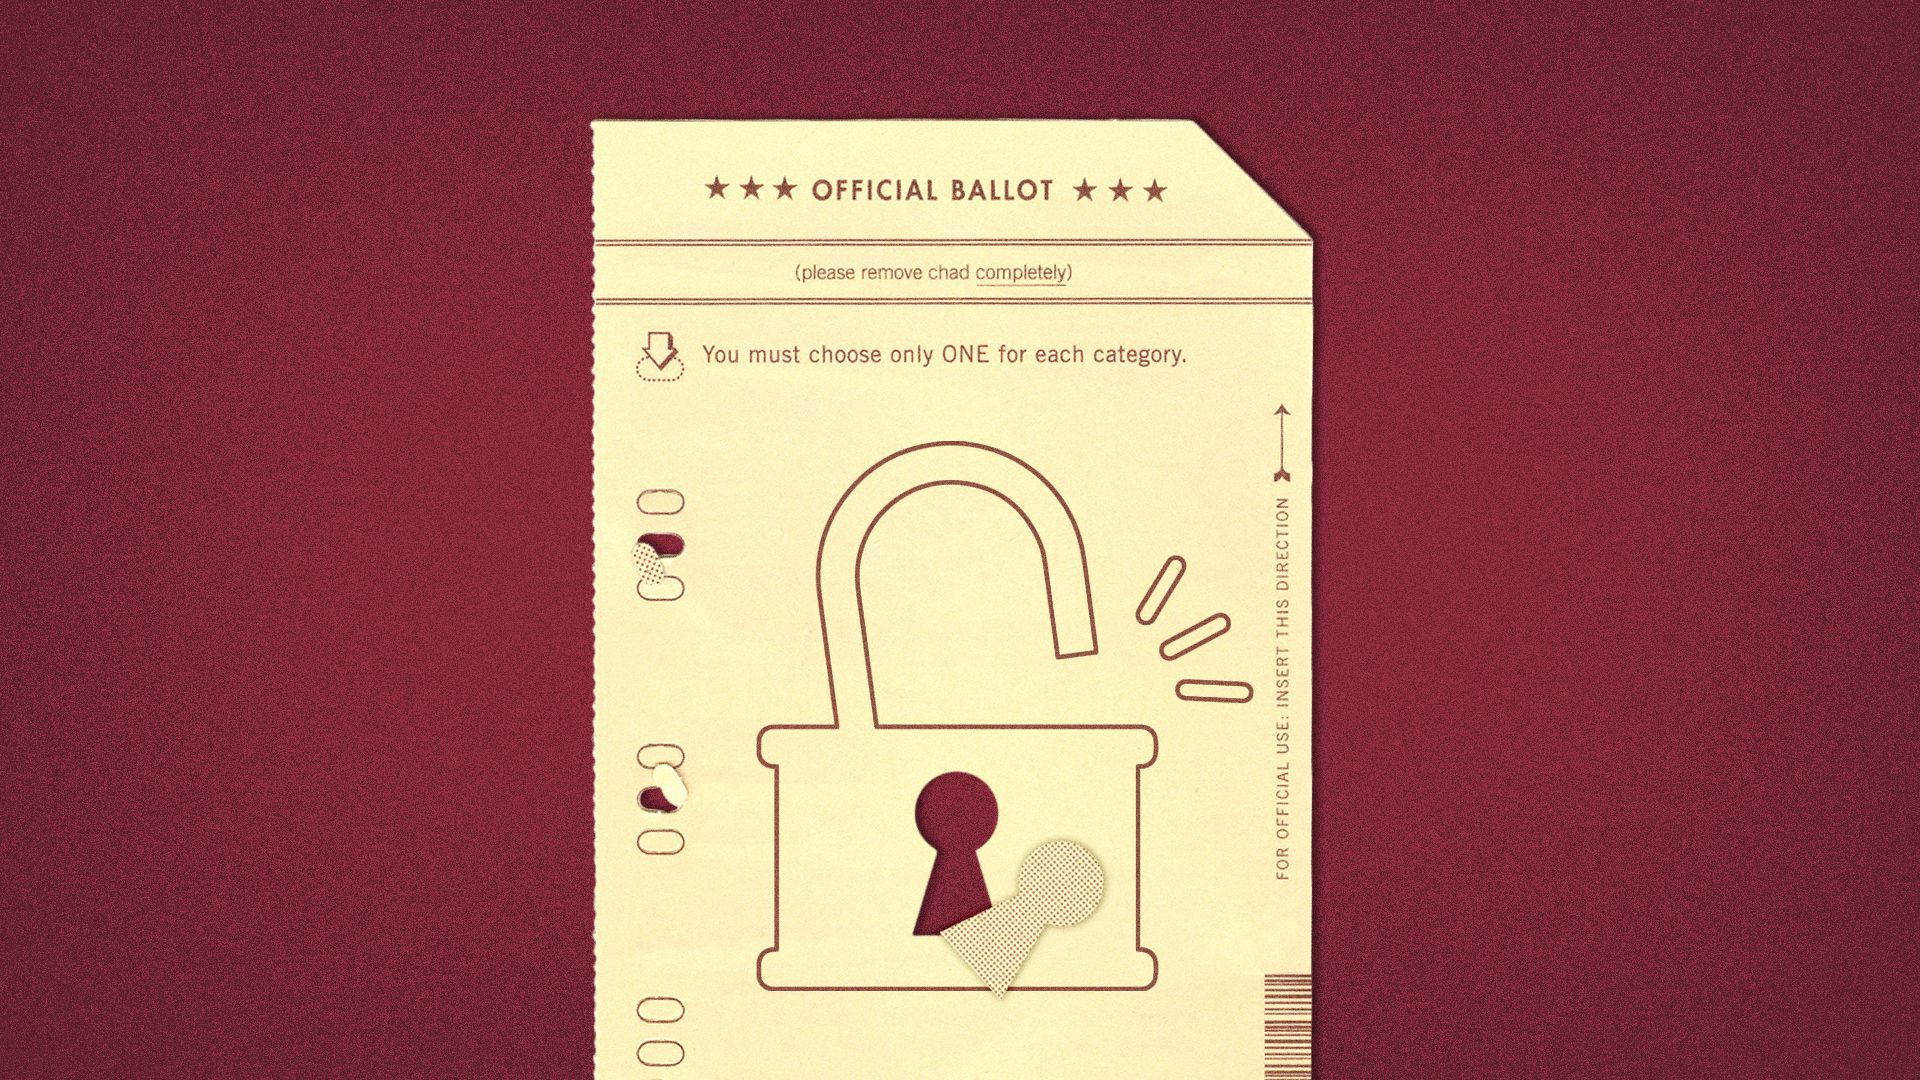 Illustration of an open lock on a voting ballot.